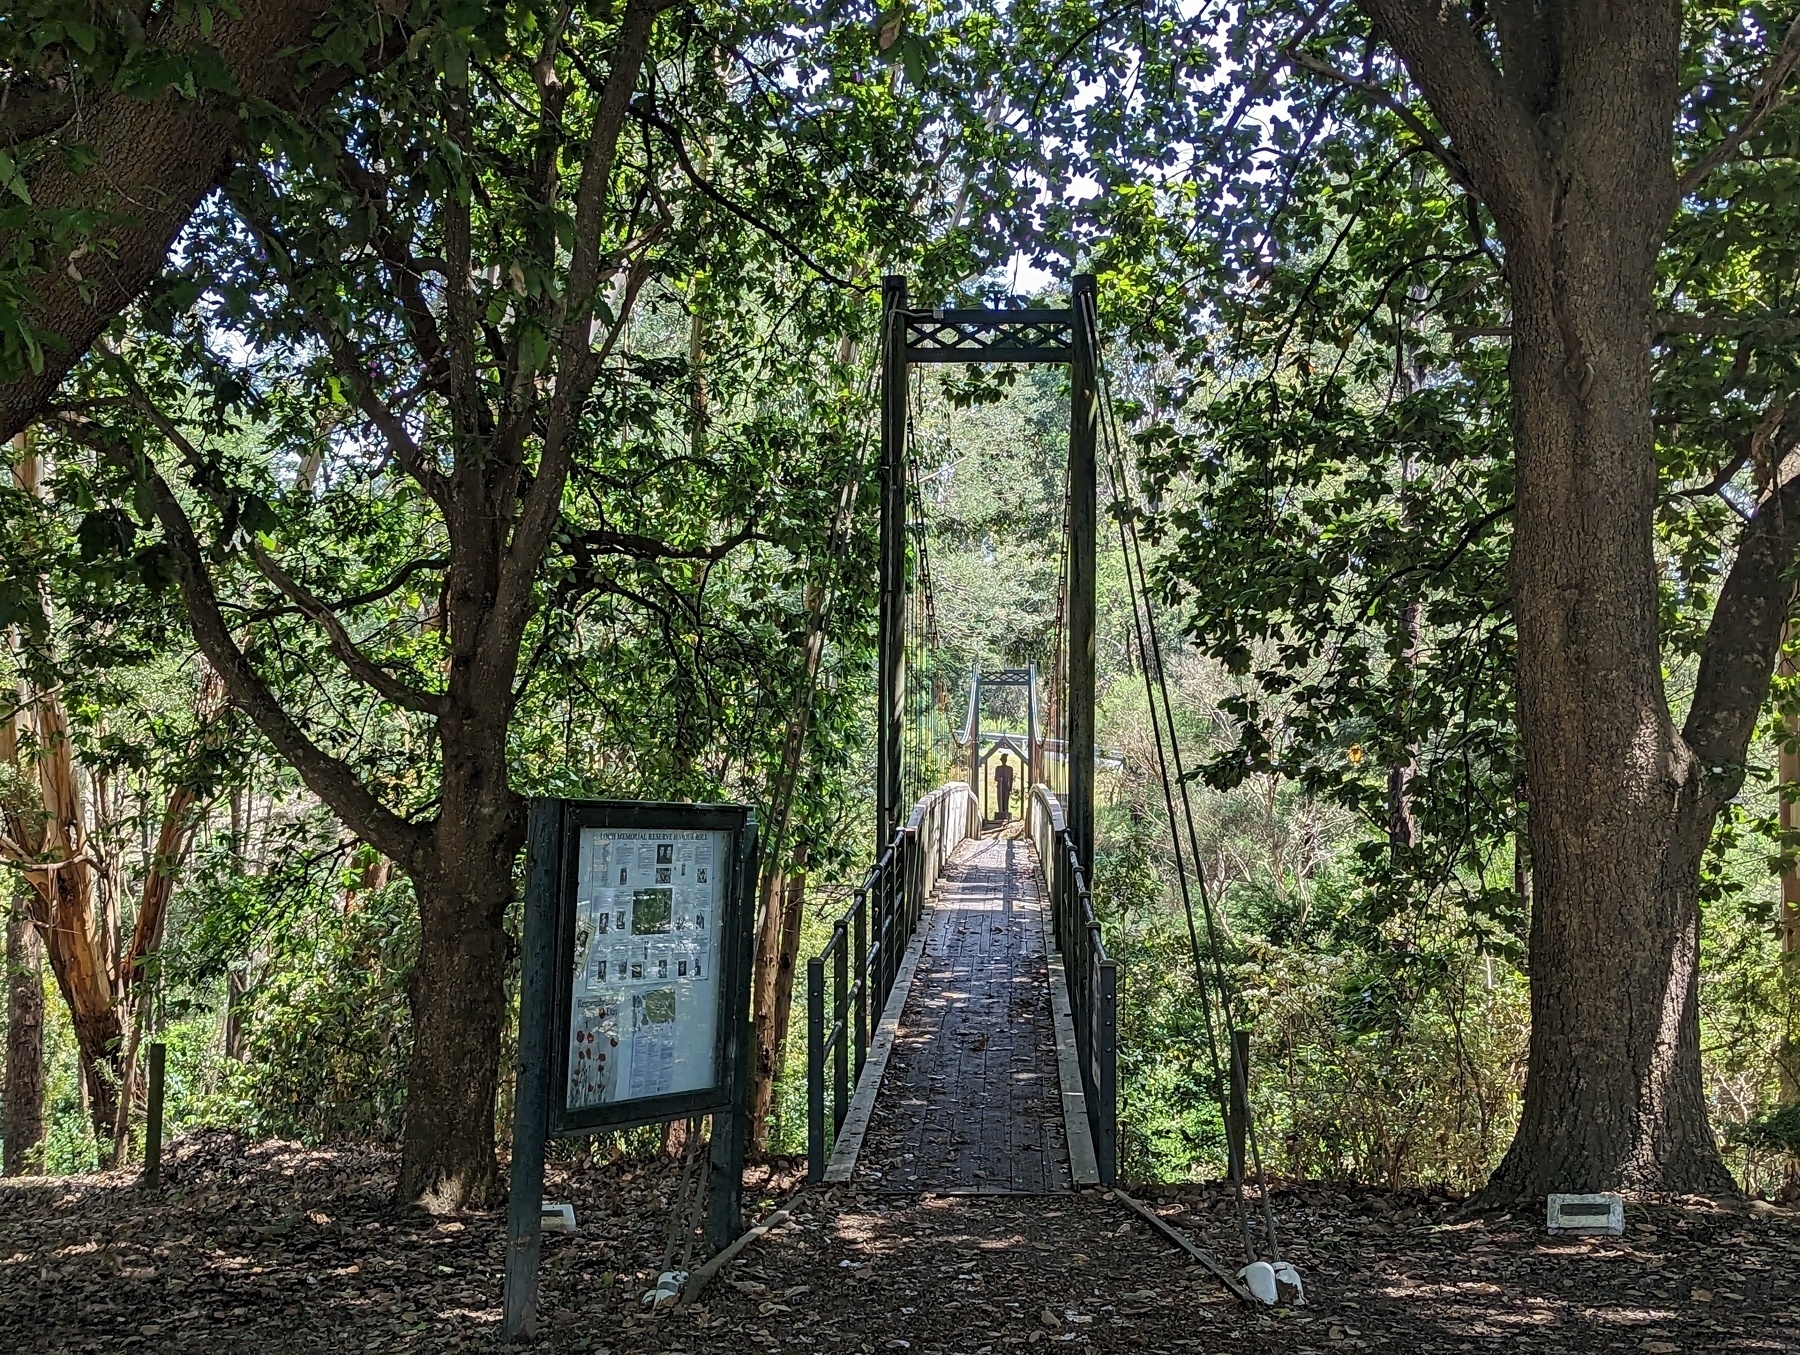 The entrance of a suspension bridge, with the towers roughly 3-4 metres high, and an information plaque to the left. The scene is in shade from what might be oak trees